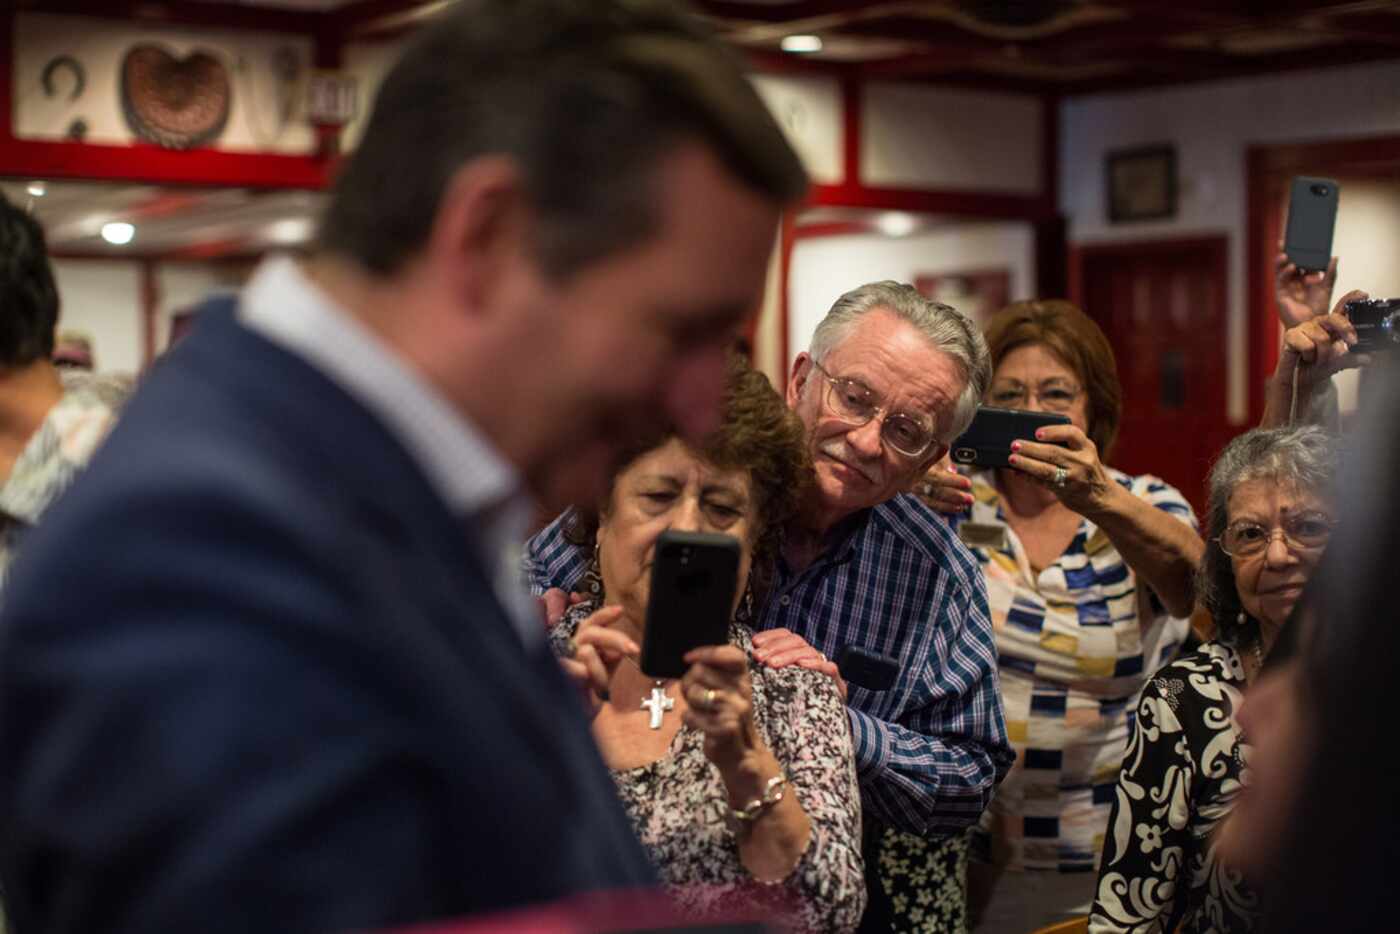 People wait in line to meet Sen. Ted Cruz in San Antonio as he campaigns for re-election.